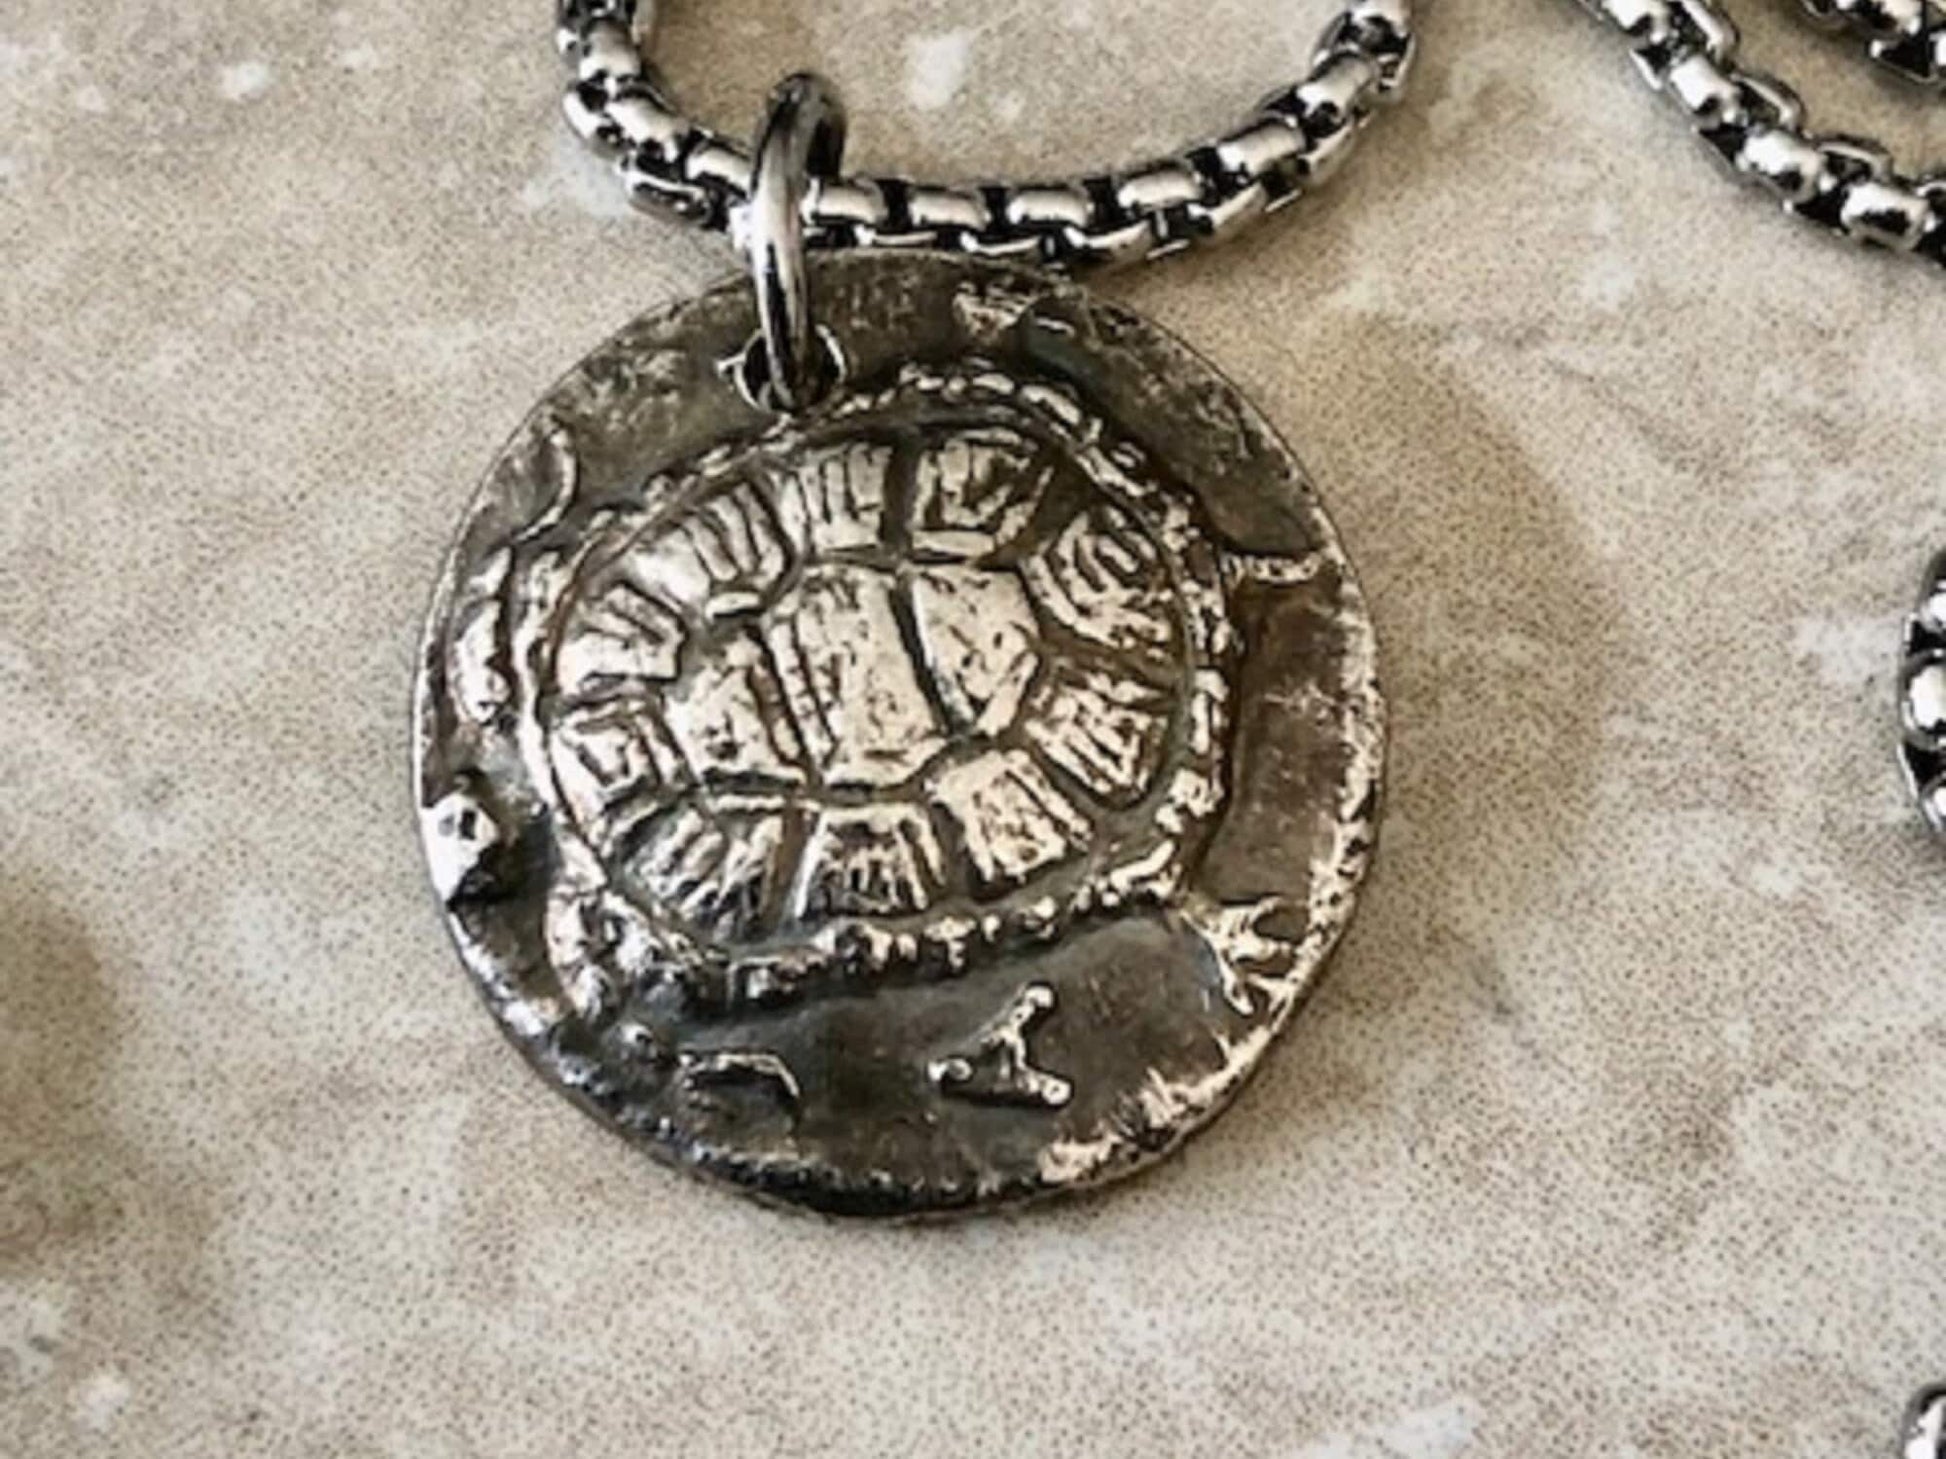 Turtle Tortoise Ancient Greek Necklace Patience, Practicality, Strength, Coin Pendant, Antique Wax Seal Jewelry, Charm From Made with Coins